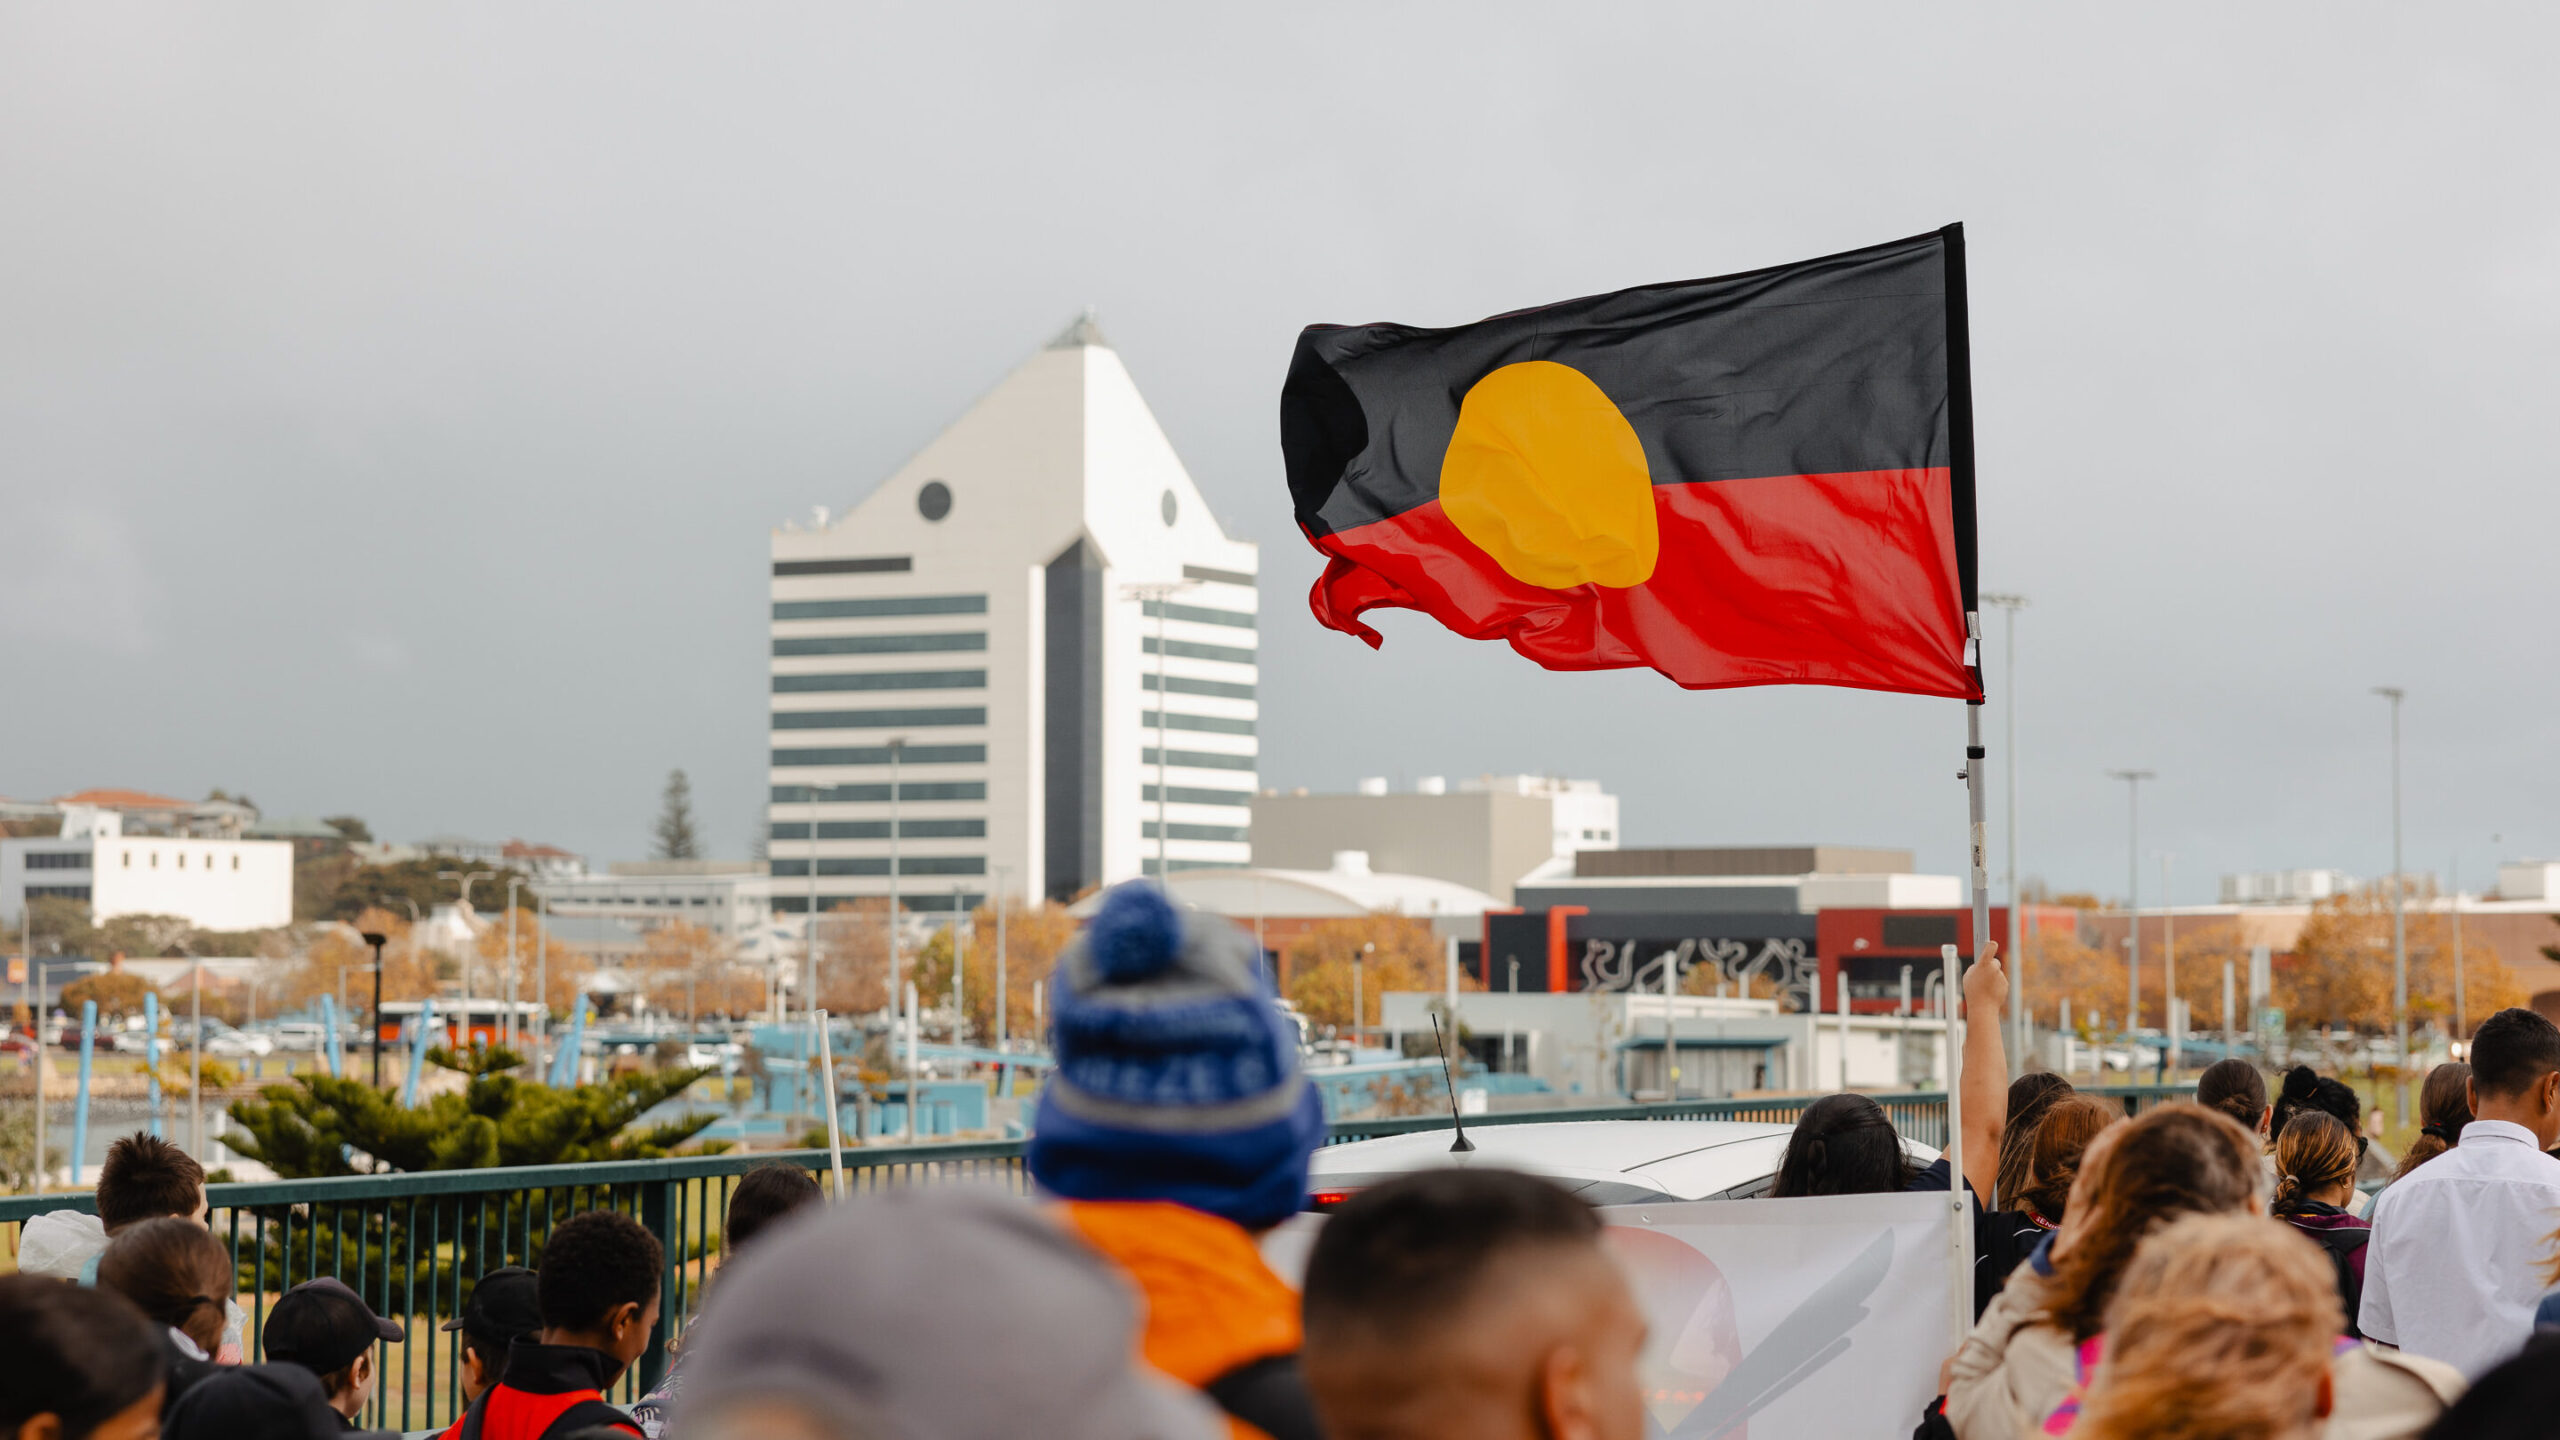 Aboriginal flag above a crowd with the Bunbury tower in the background.